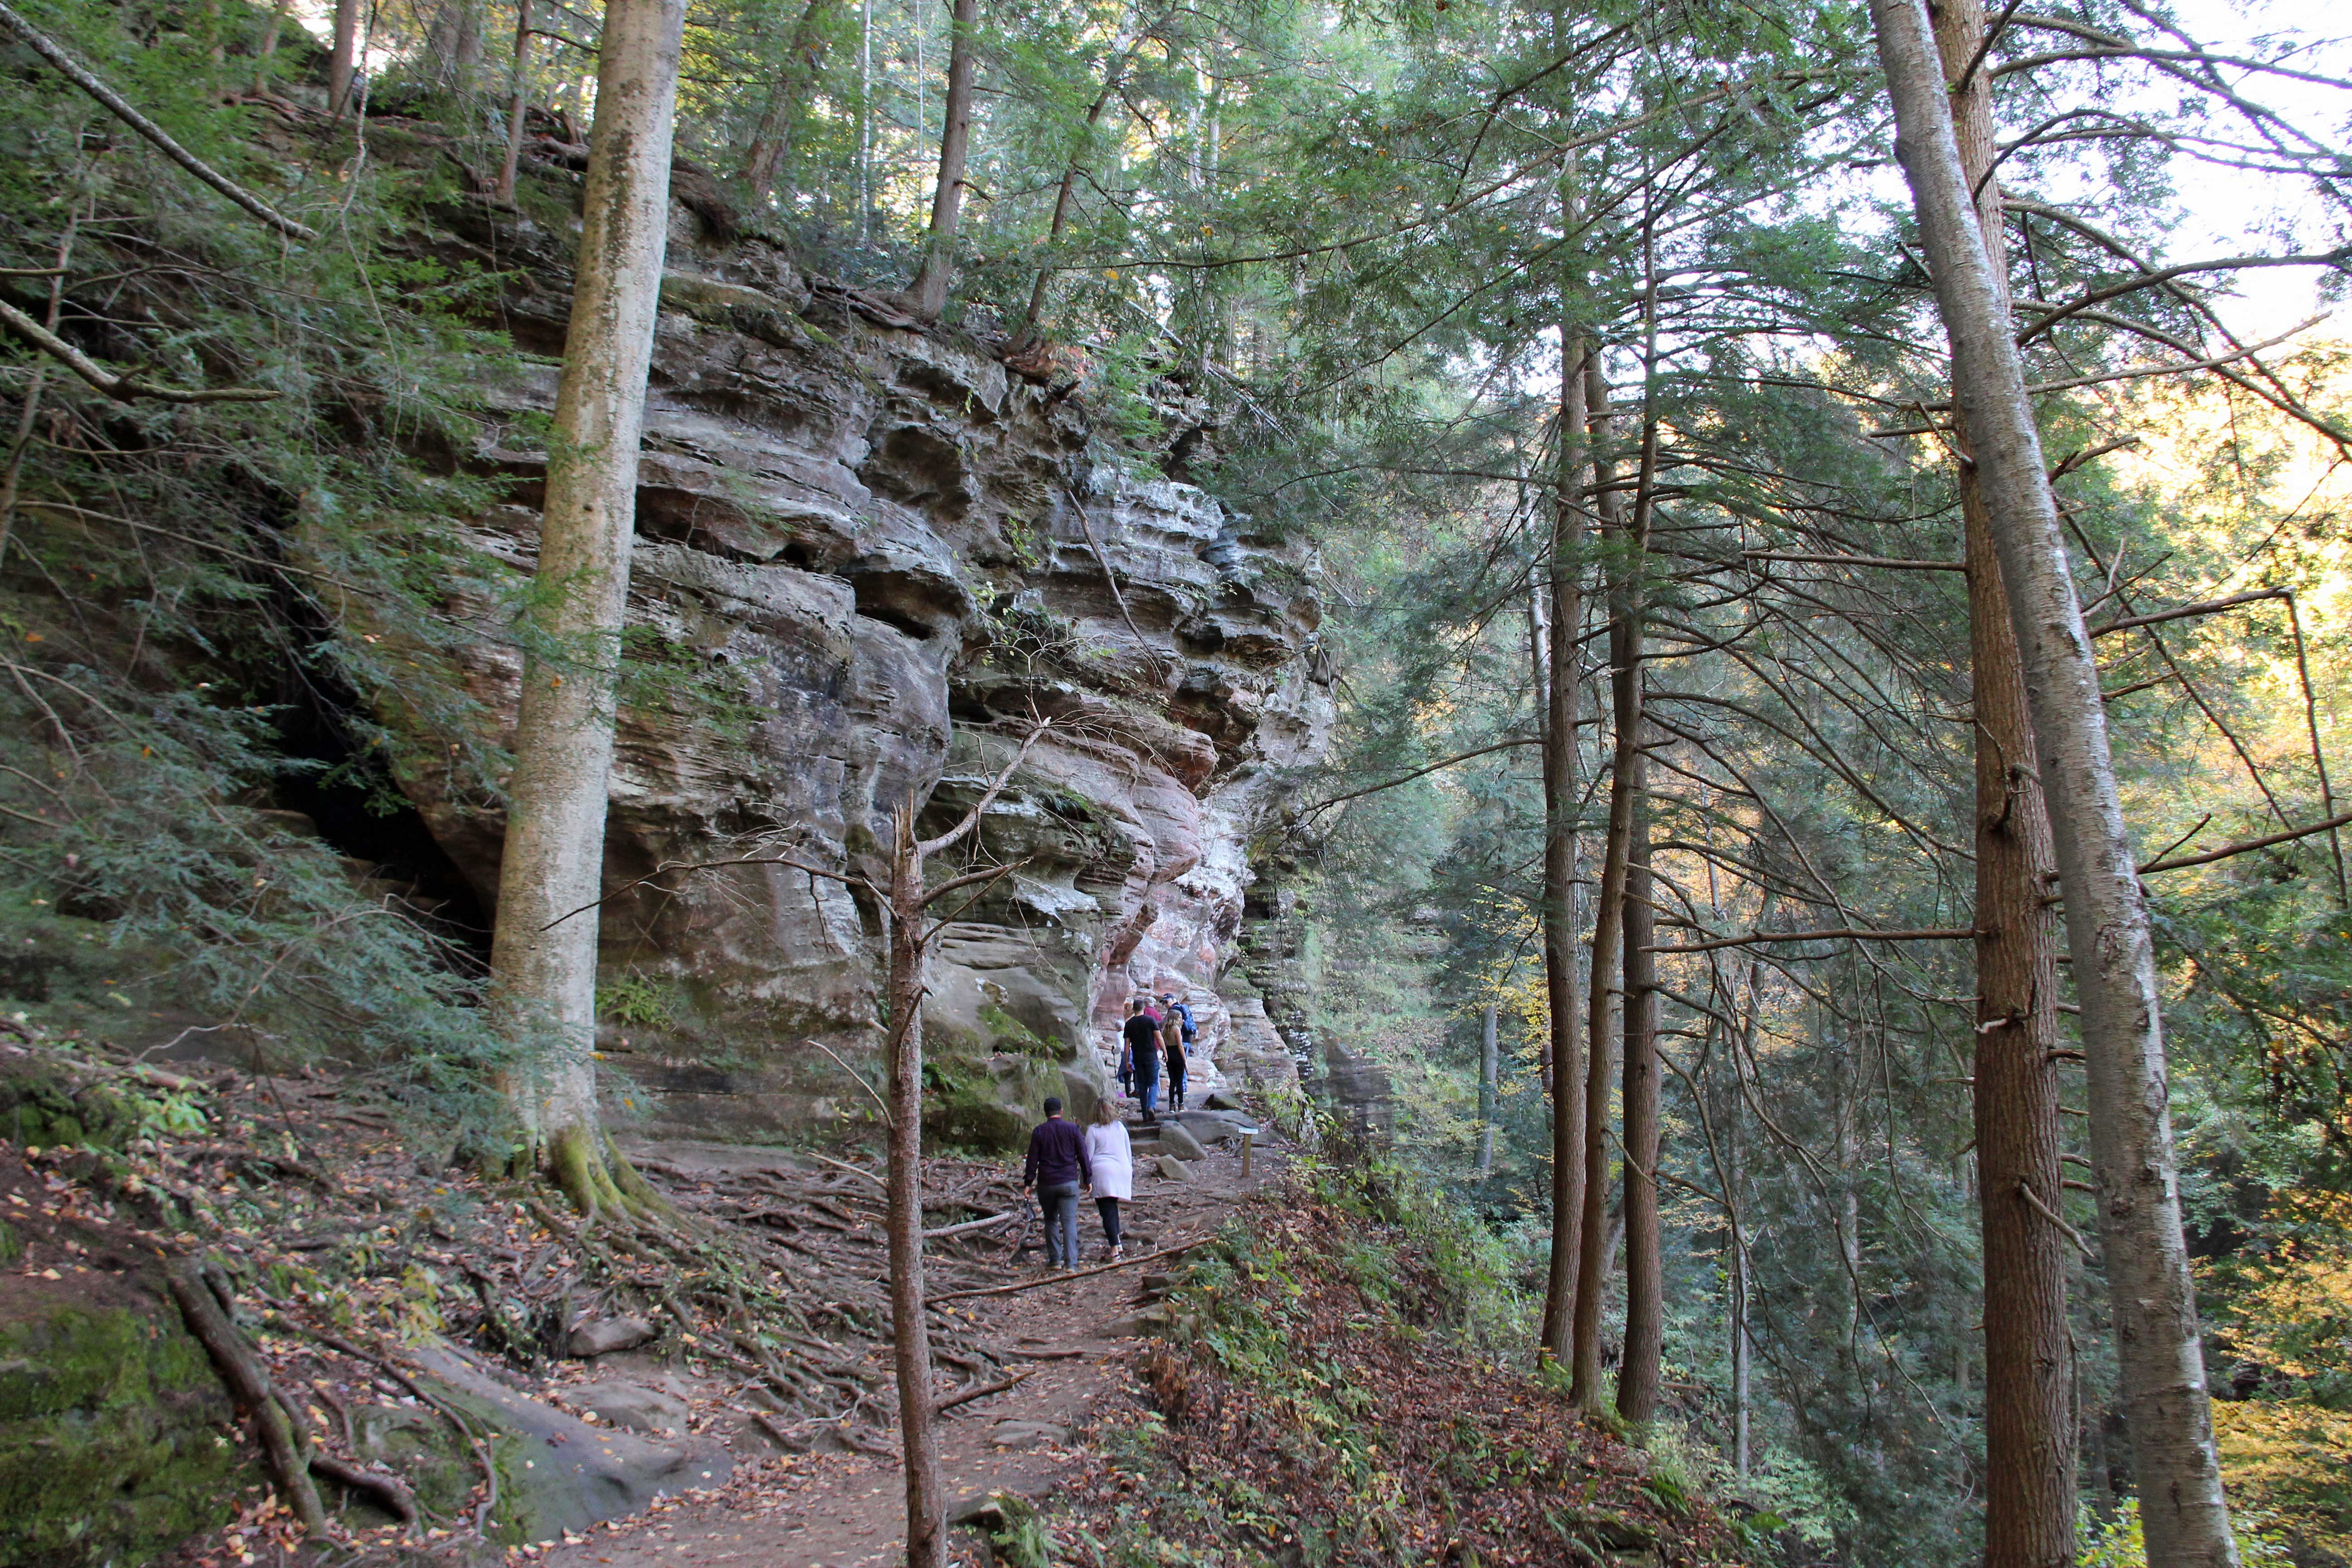 Visitors hiking a wooded trail along the impressive rock formations at Hocking Hills State Park, showcasing the natural beauty and serene environment